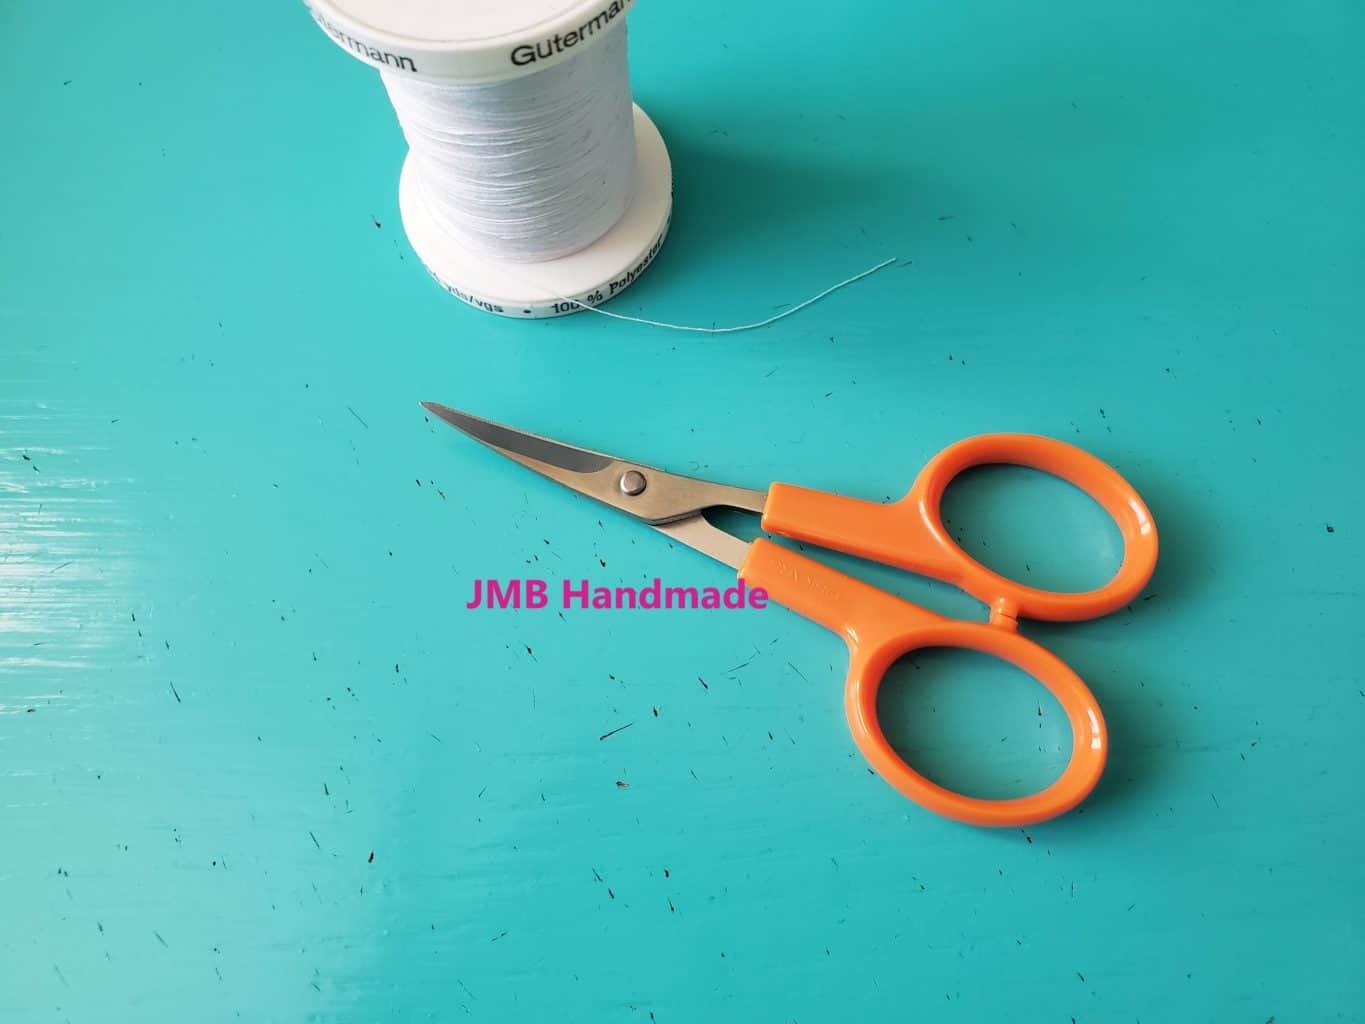 8 Sewing Studio Supplies to Add to Your Collection - JMB Handmade